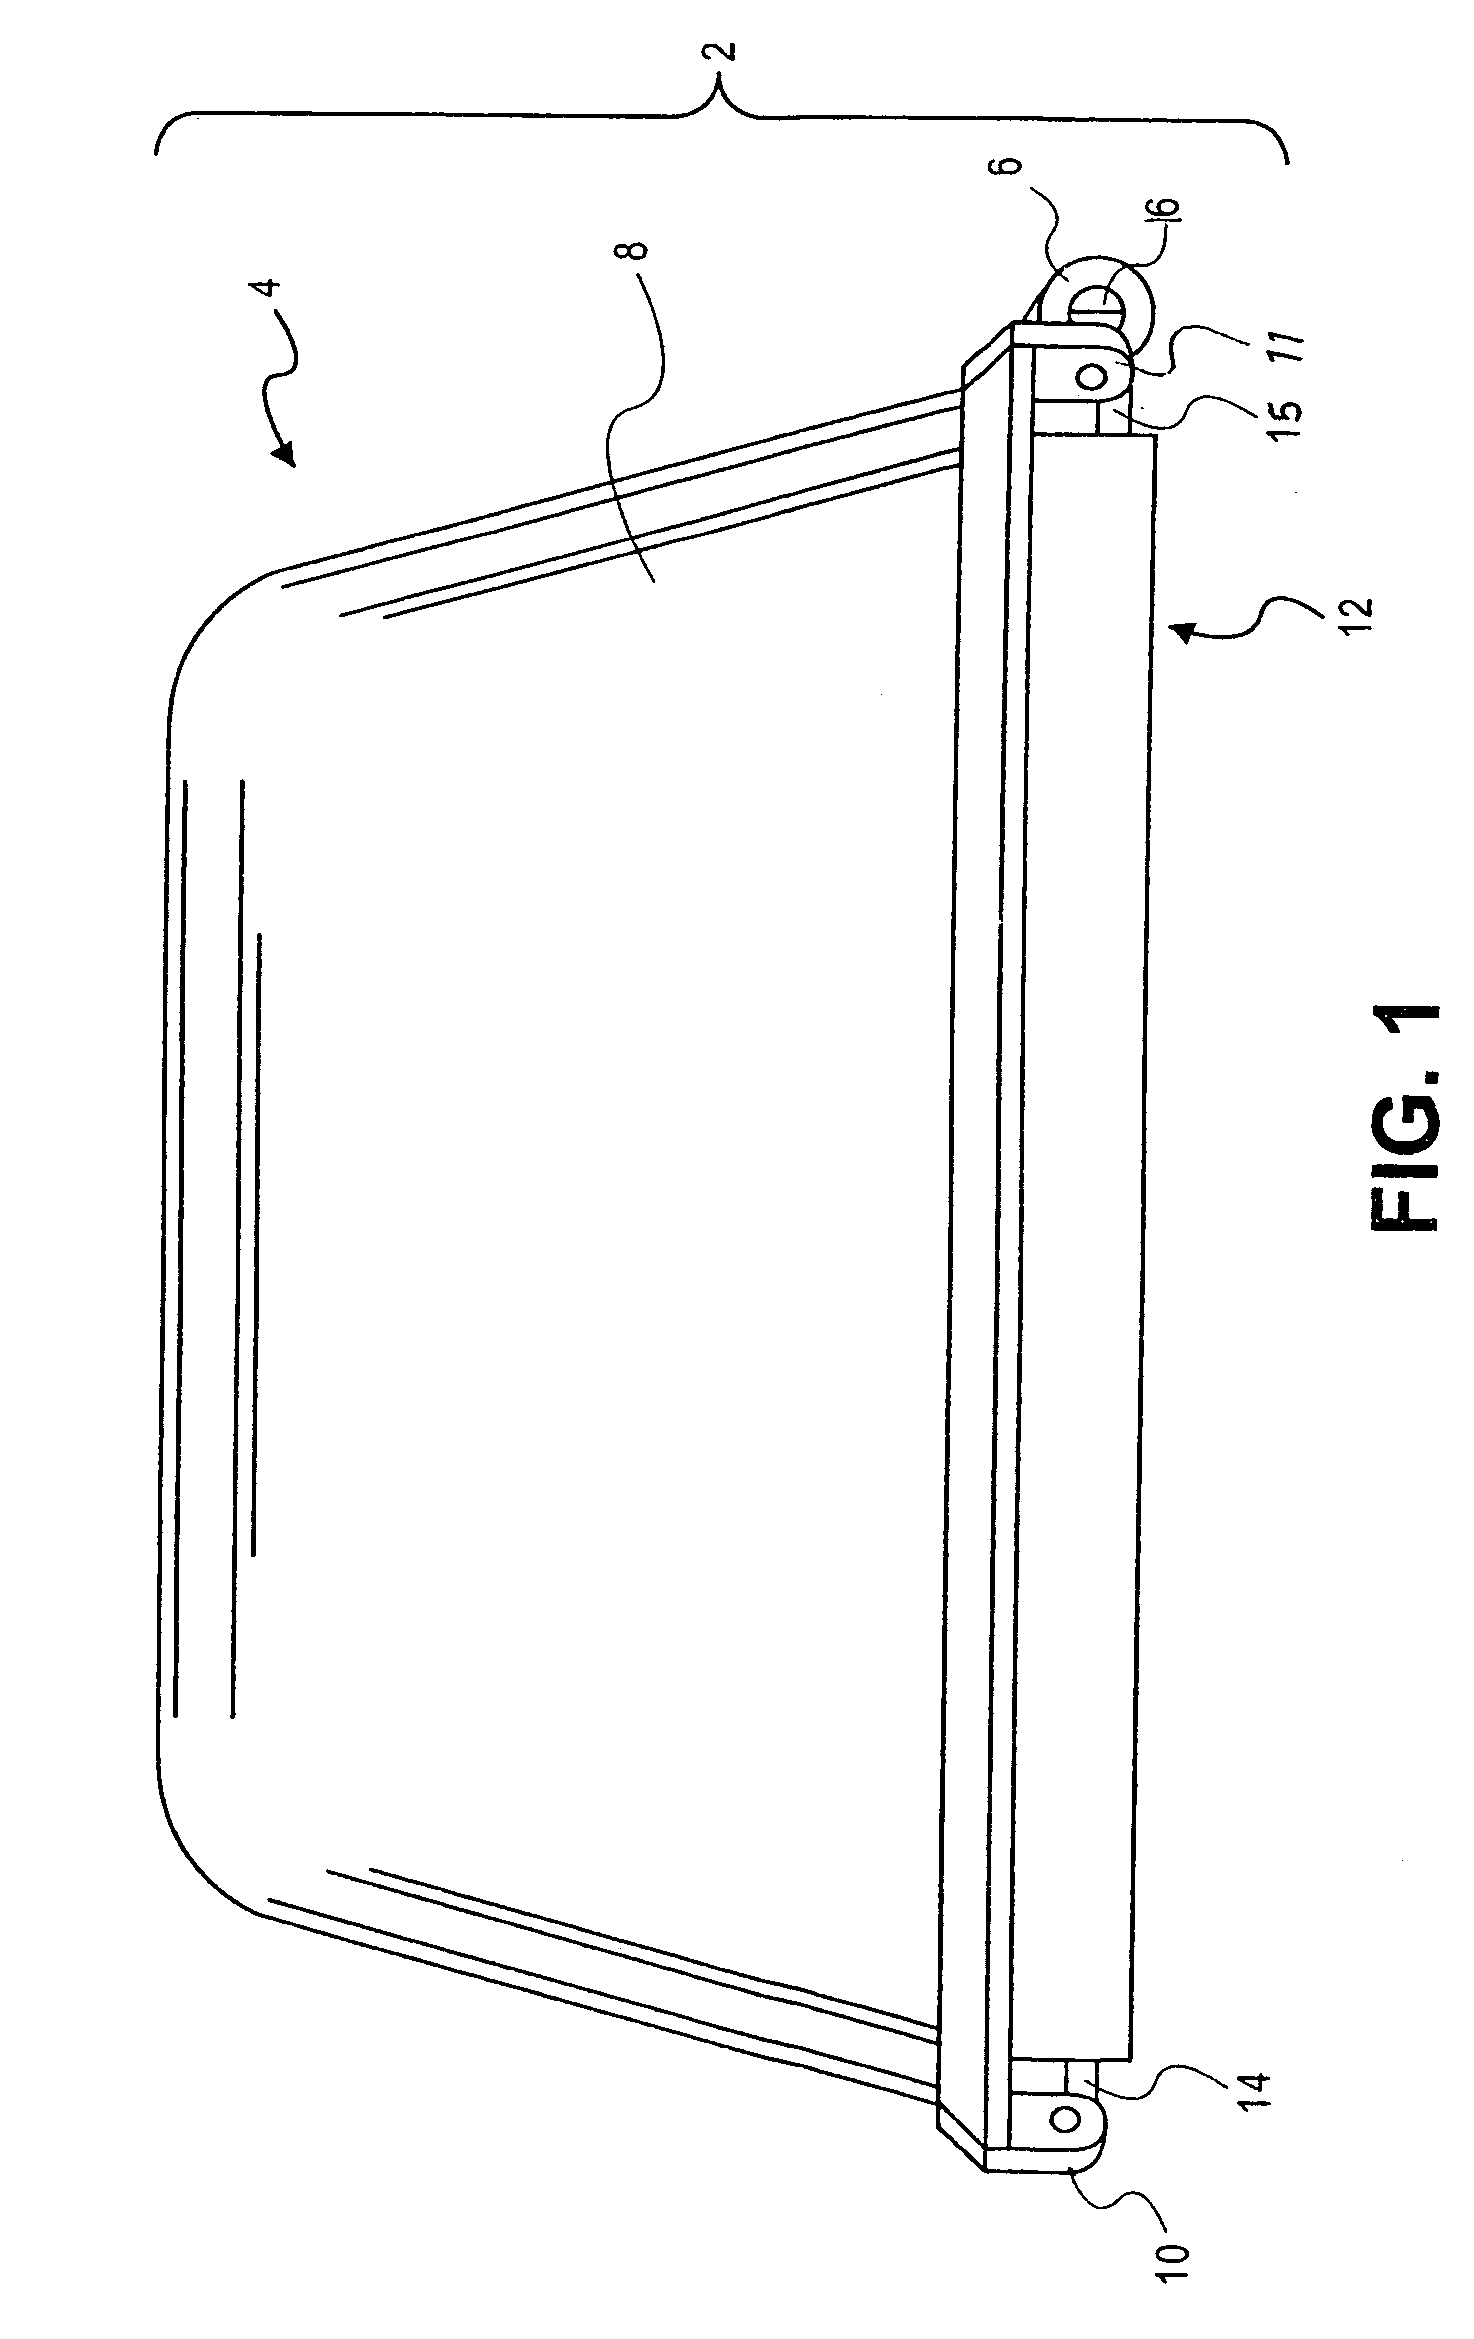 Horizontal and vertical in-use electrical device cover